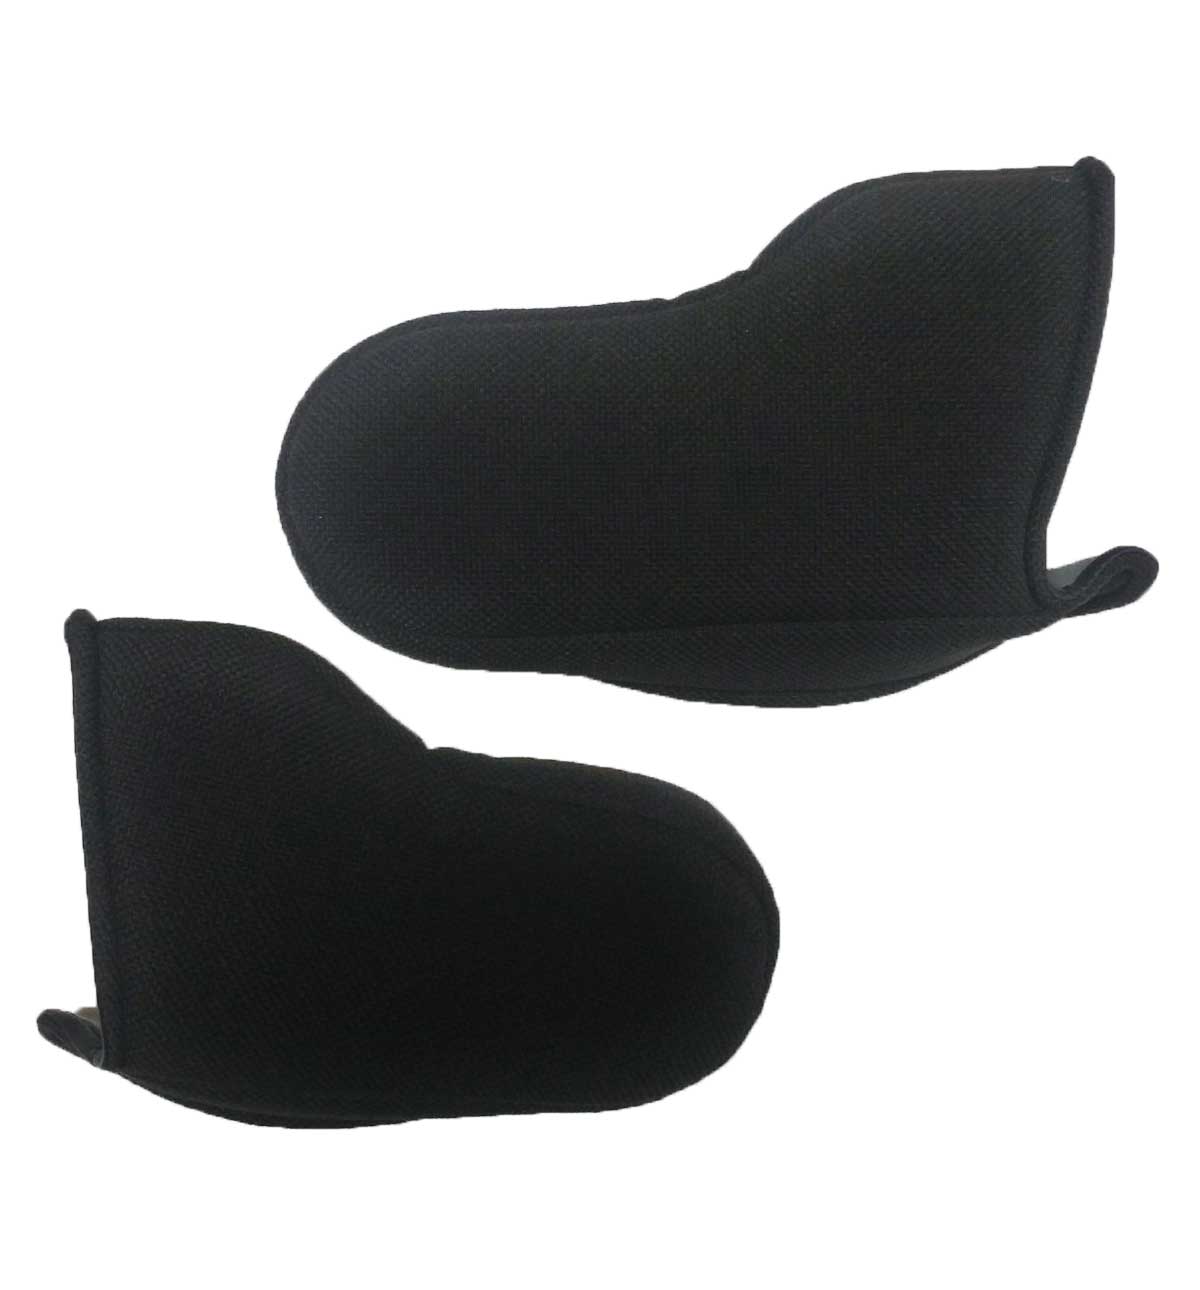 Fabric Cover for Halo Head Support  - Adult Seats